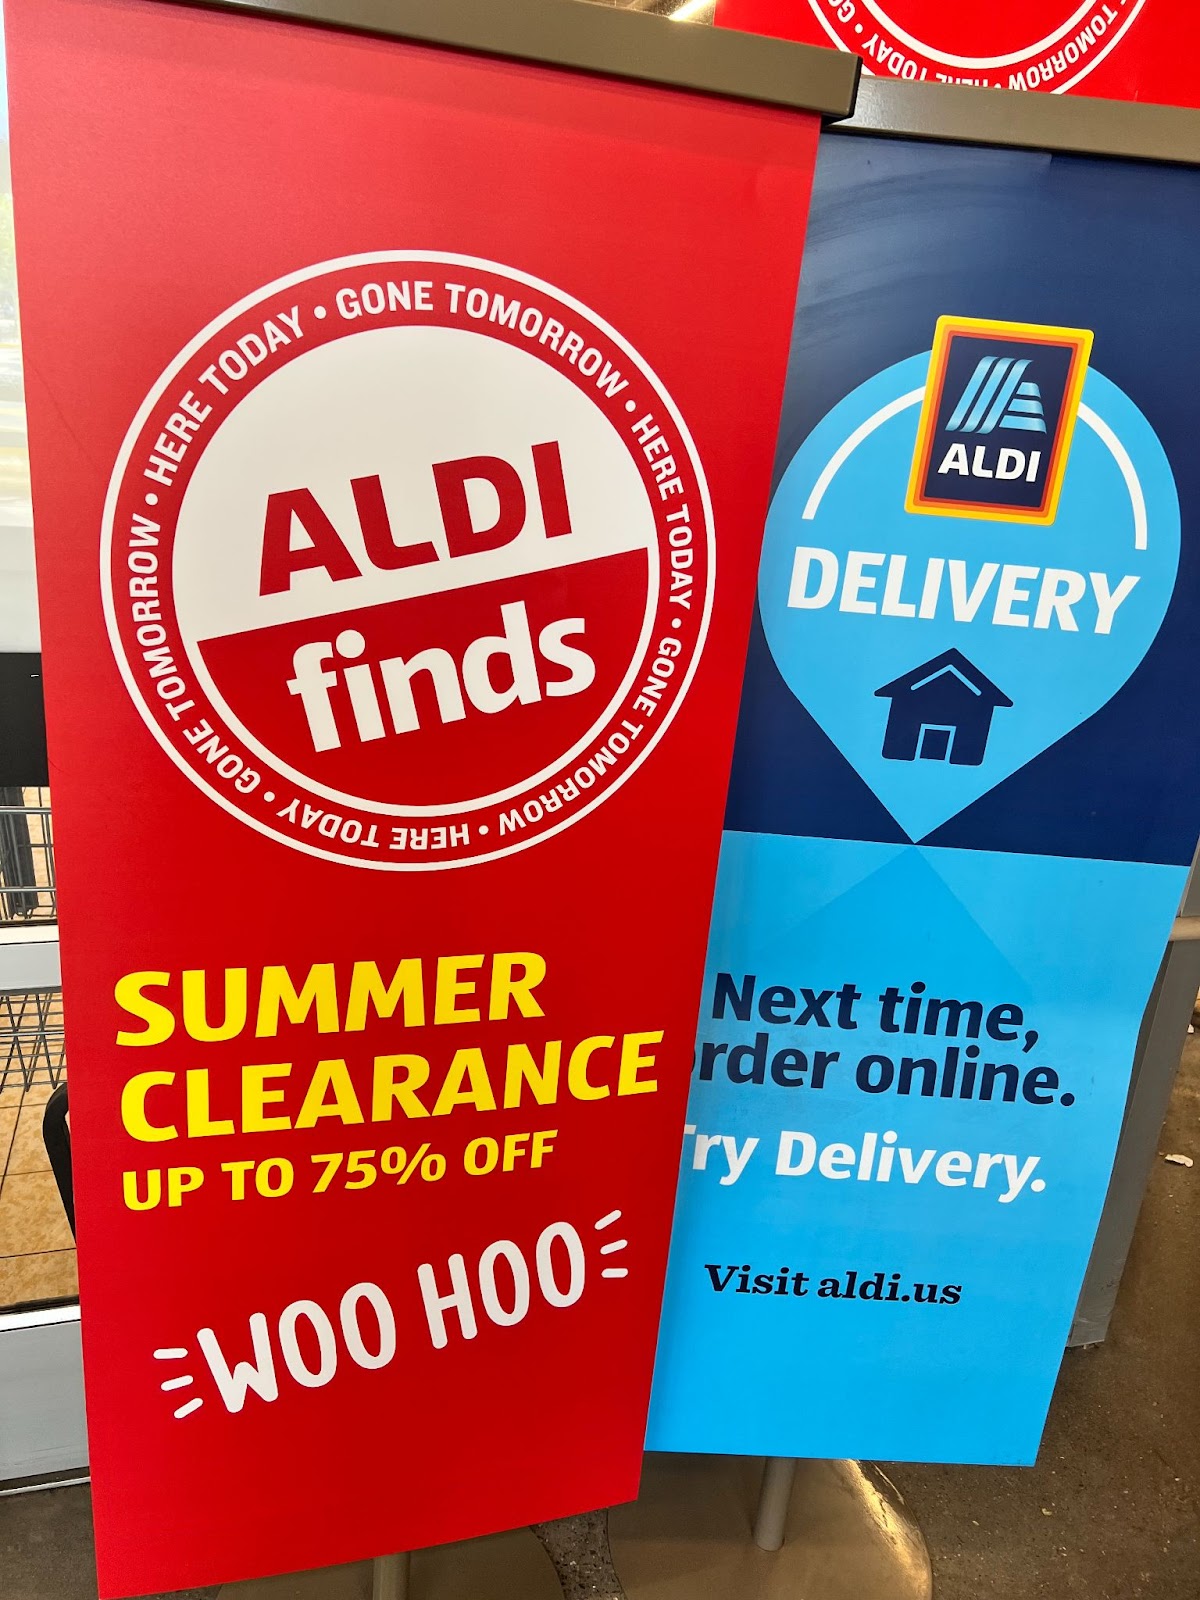 Display of summer clearance sign at an Aldi store